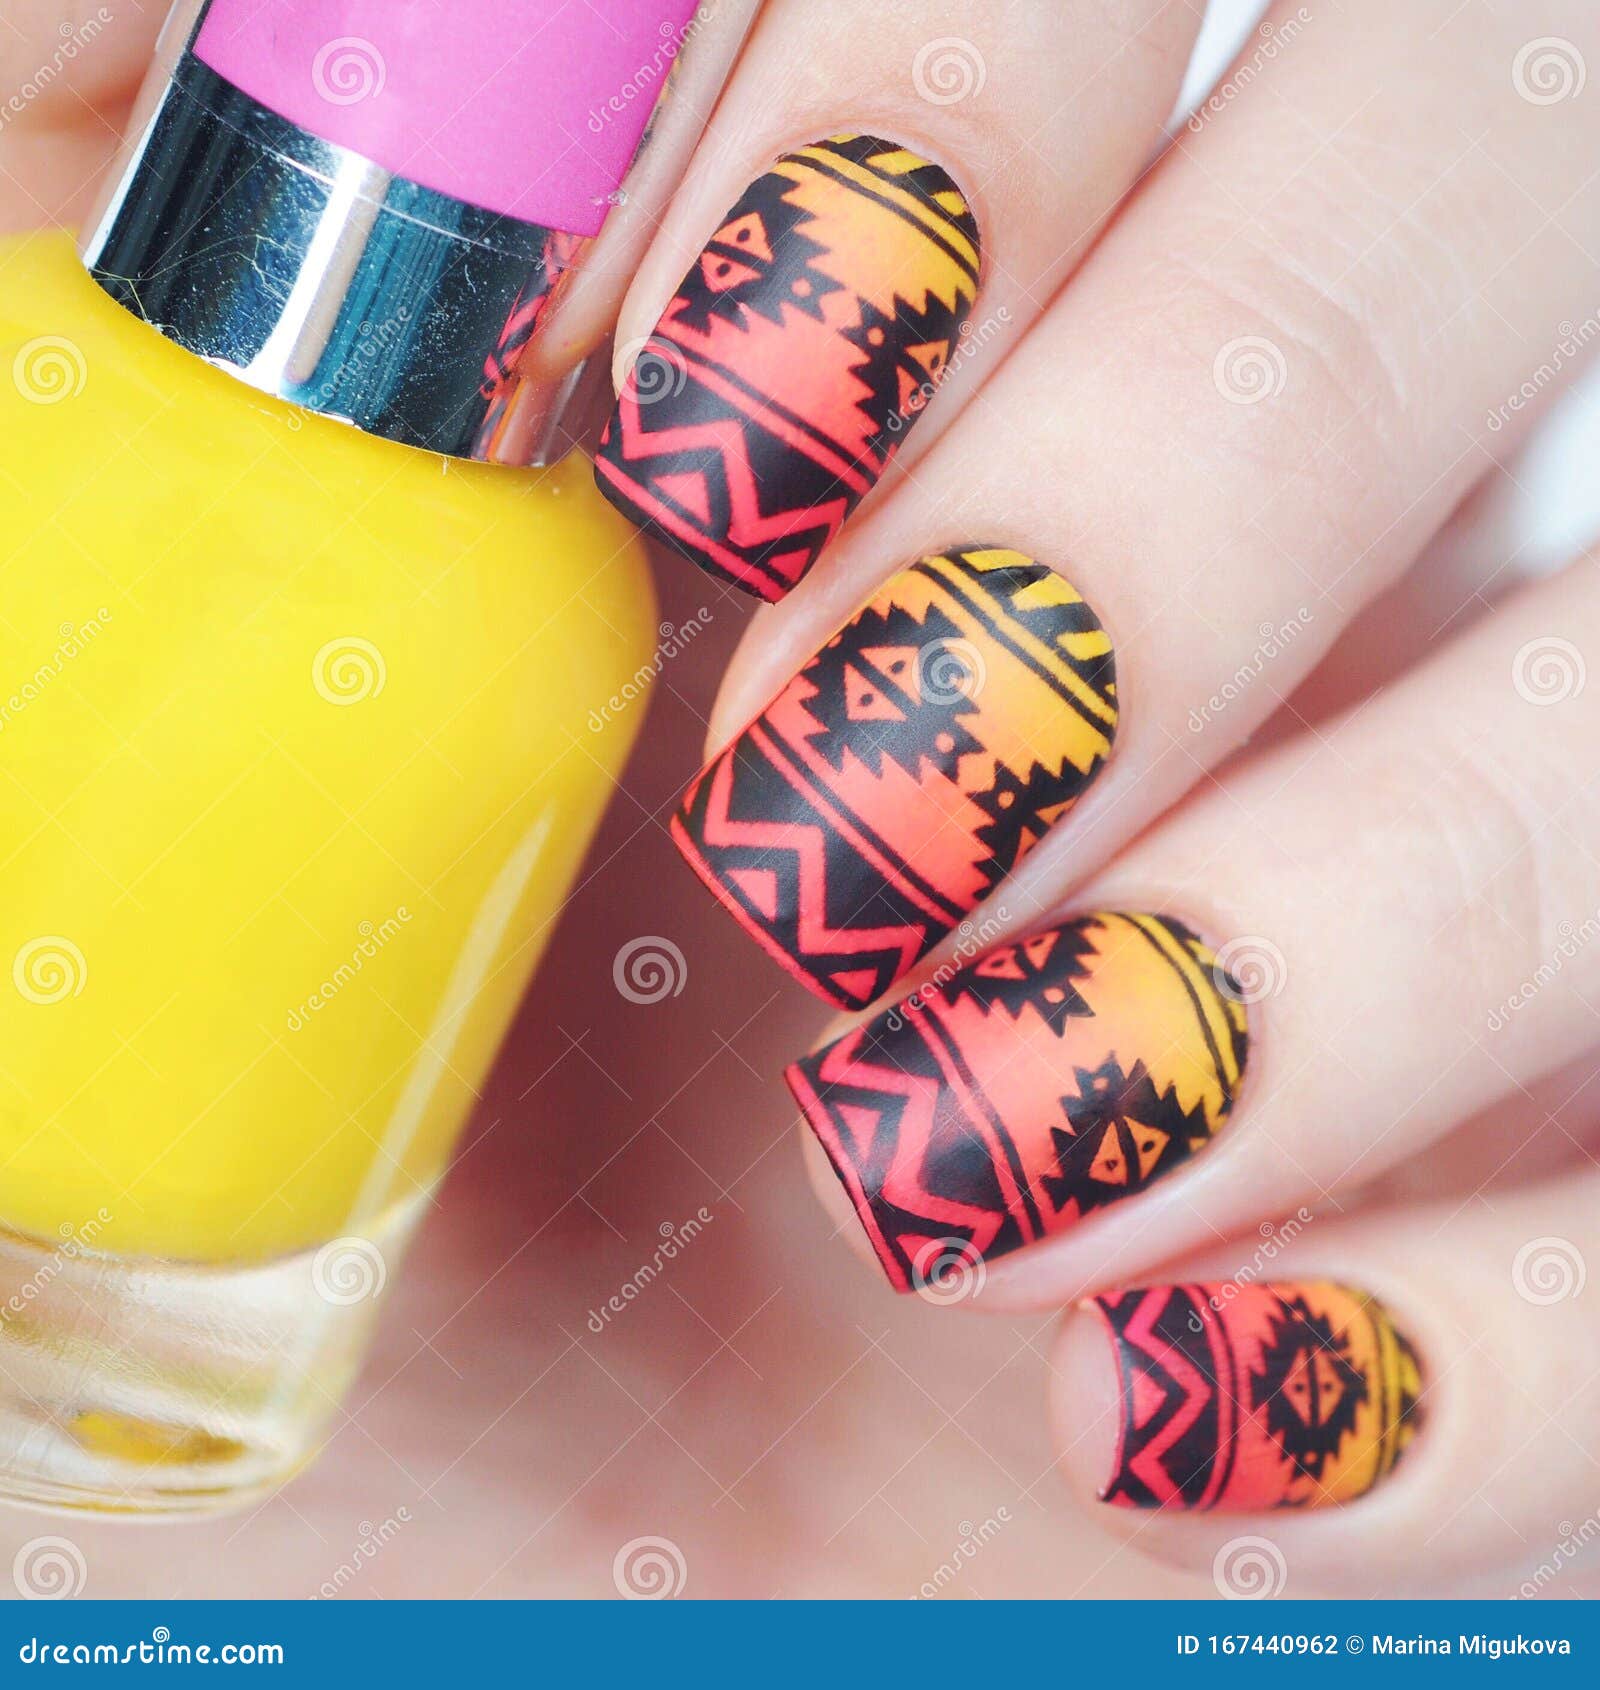 Nail Art Water Decals Stickers Transfers Abstract Lines Aztec Star Tribal  (X39) | eBay